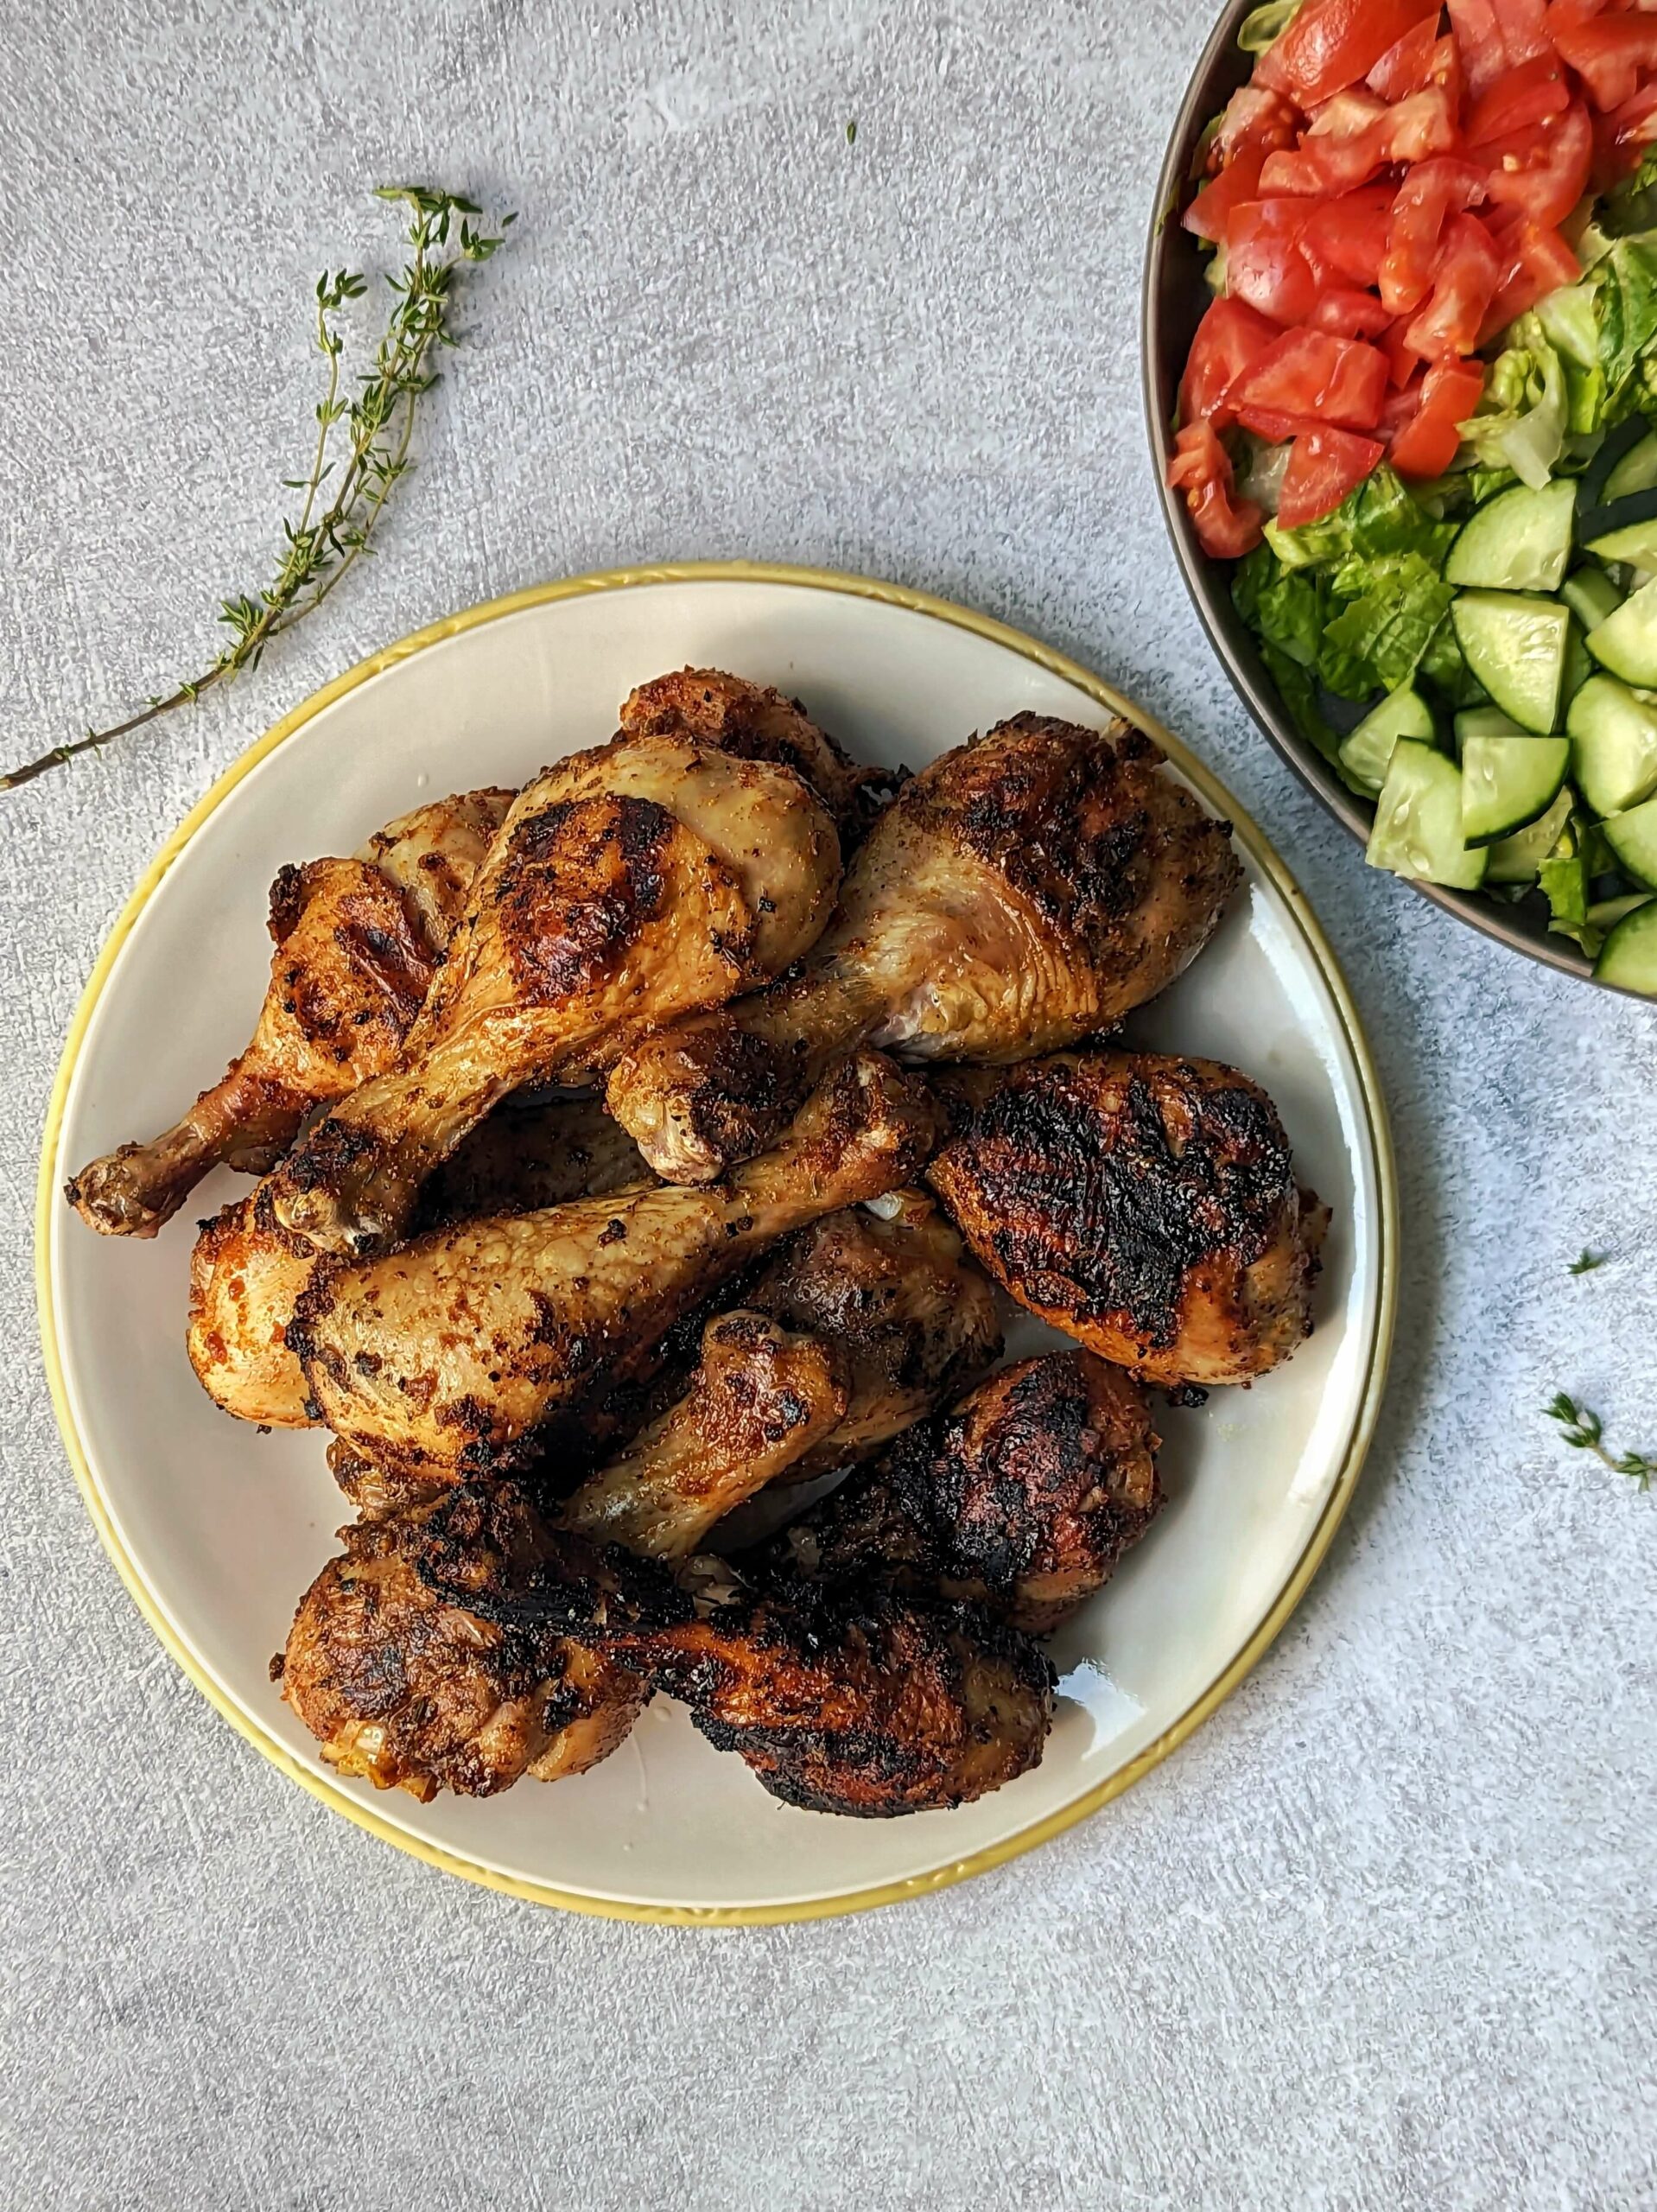 A plate full of grilled chicken drumsticks each with a perfect char and a tossed salad in the background.